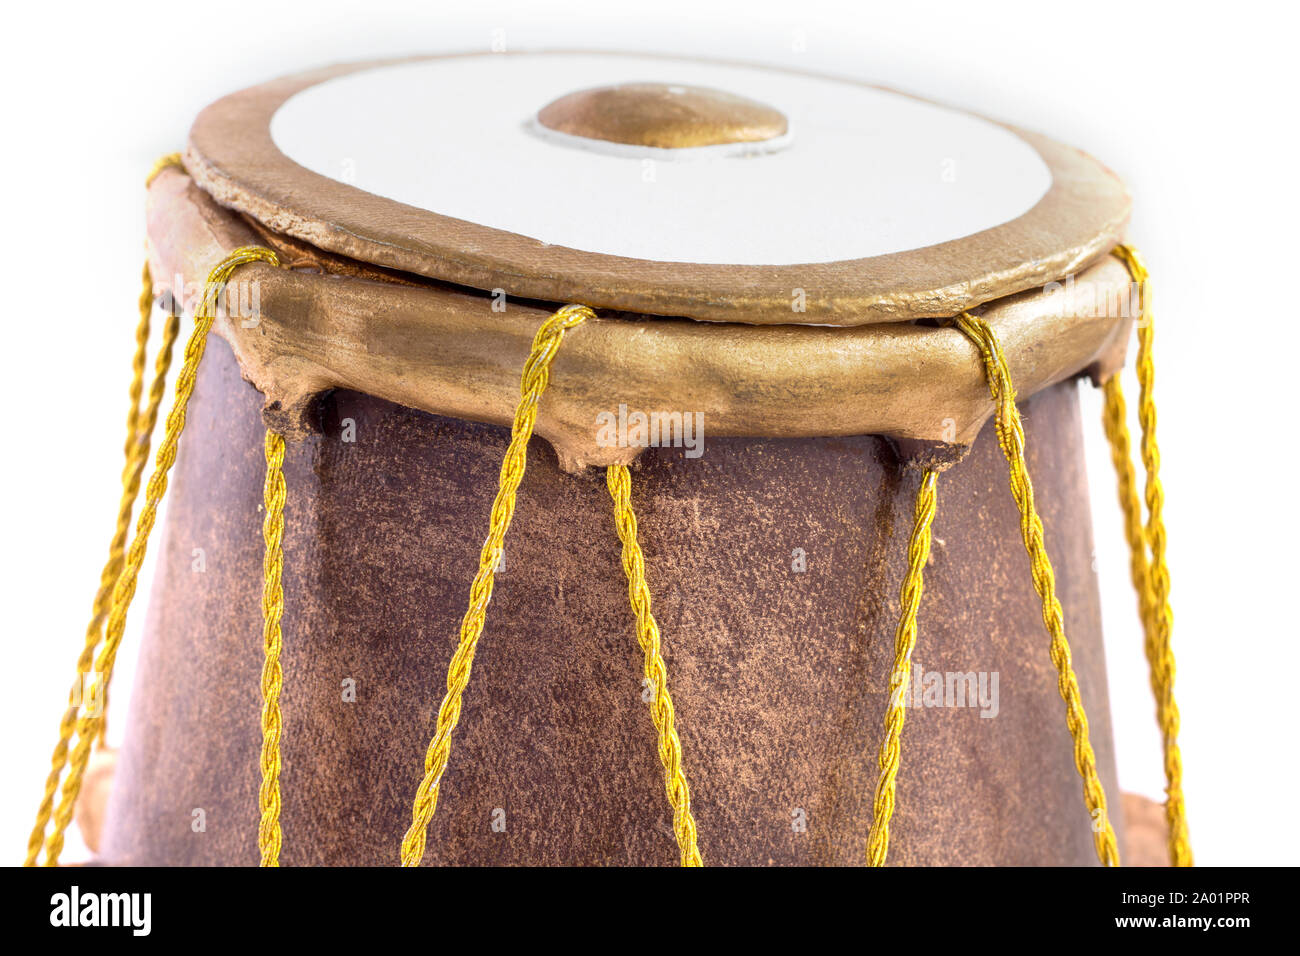 Picture of Musical Instrument Tabla Drum. Isolated on a white background. Stock Photo